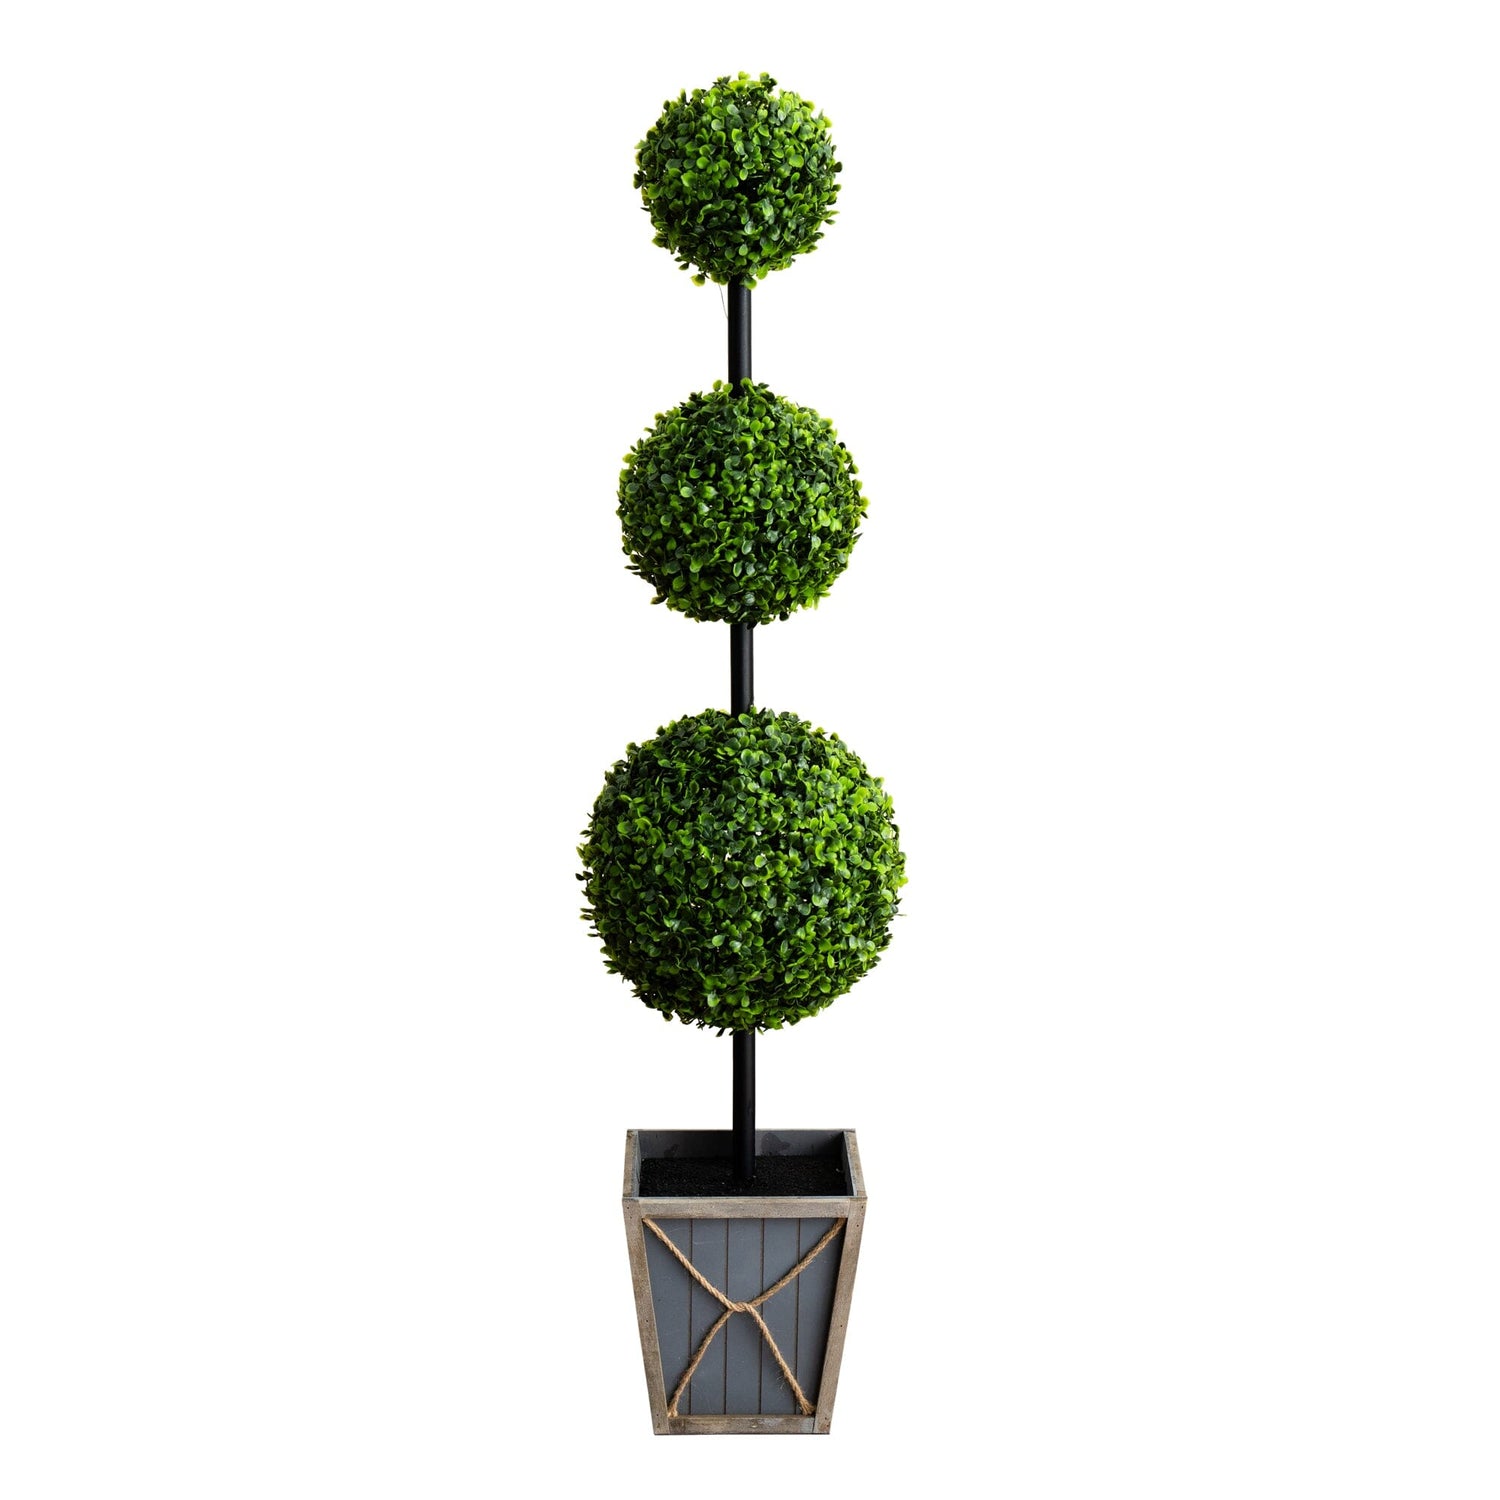 45" UV Resistant Artificial Triple Ball Boxwood Topiary with LED Lights in Decorative Planter (Indoor/Outdoor)